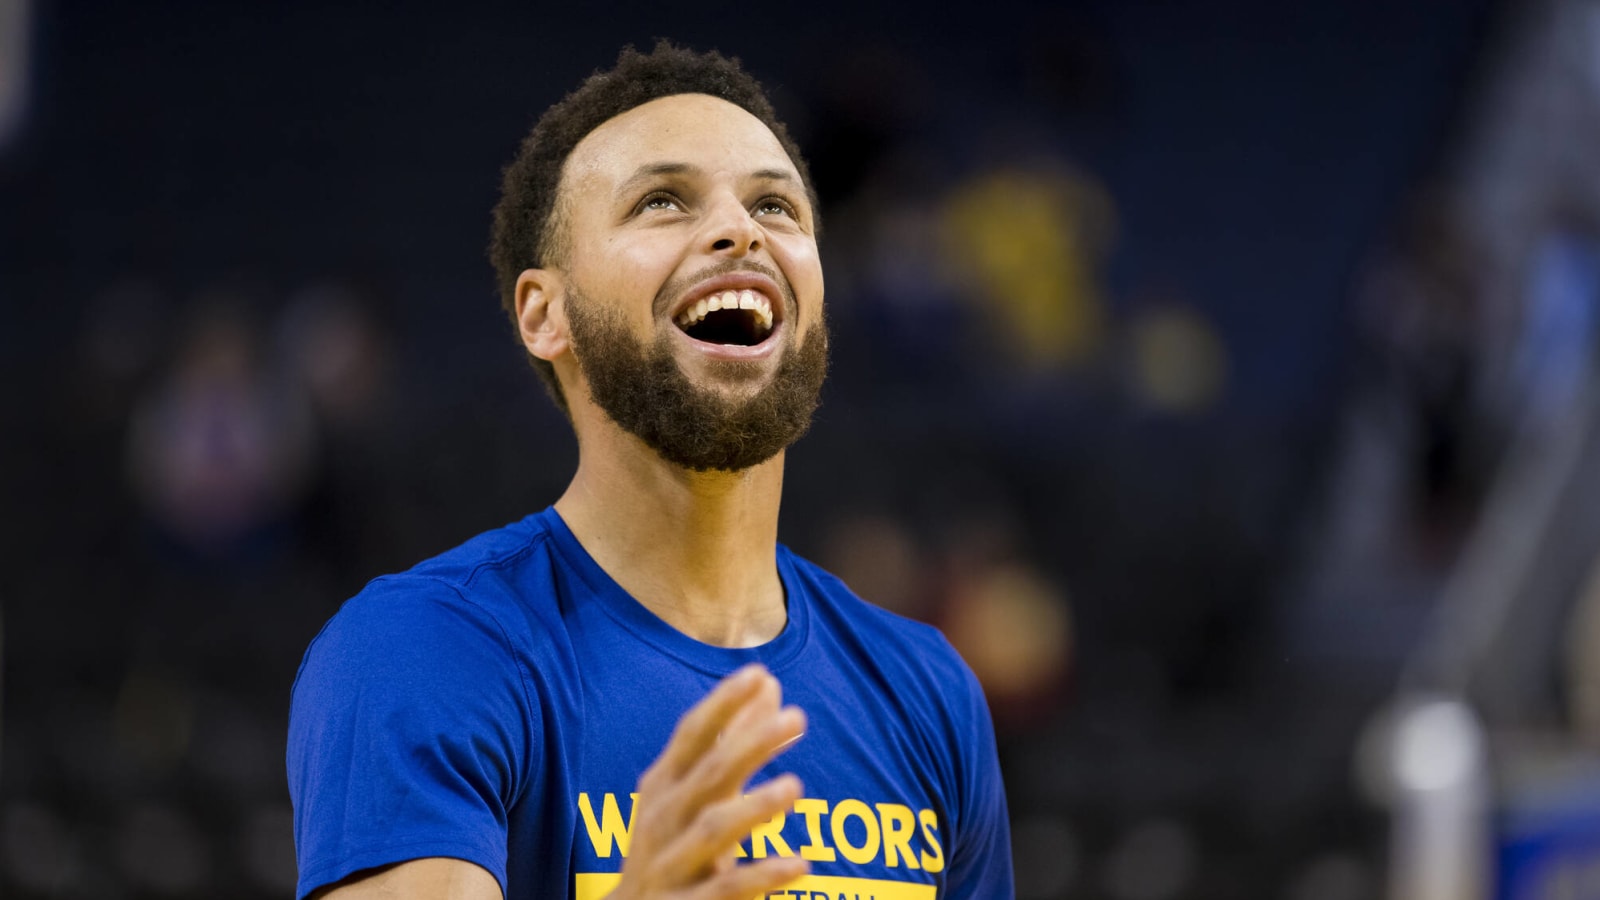 Viral video of Steph Curry making full-court shots fake?